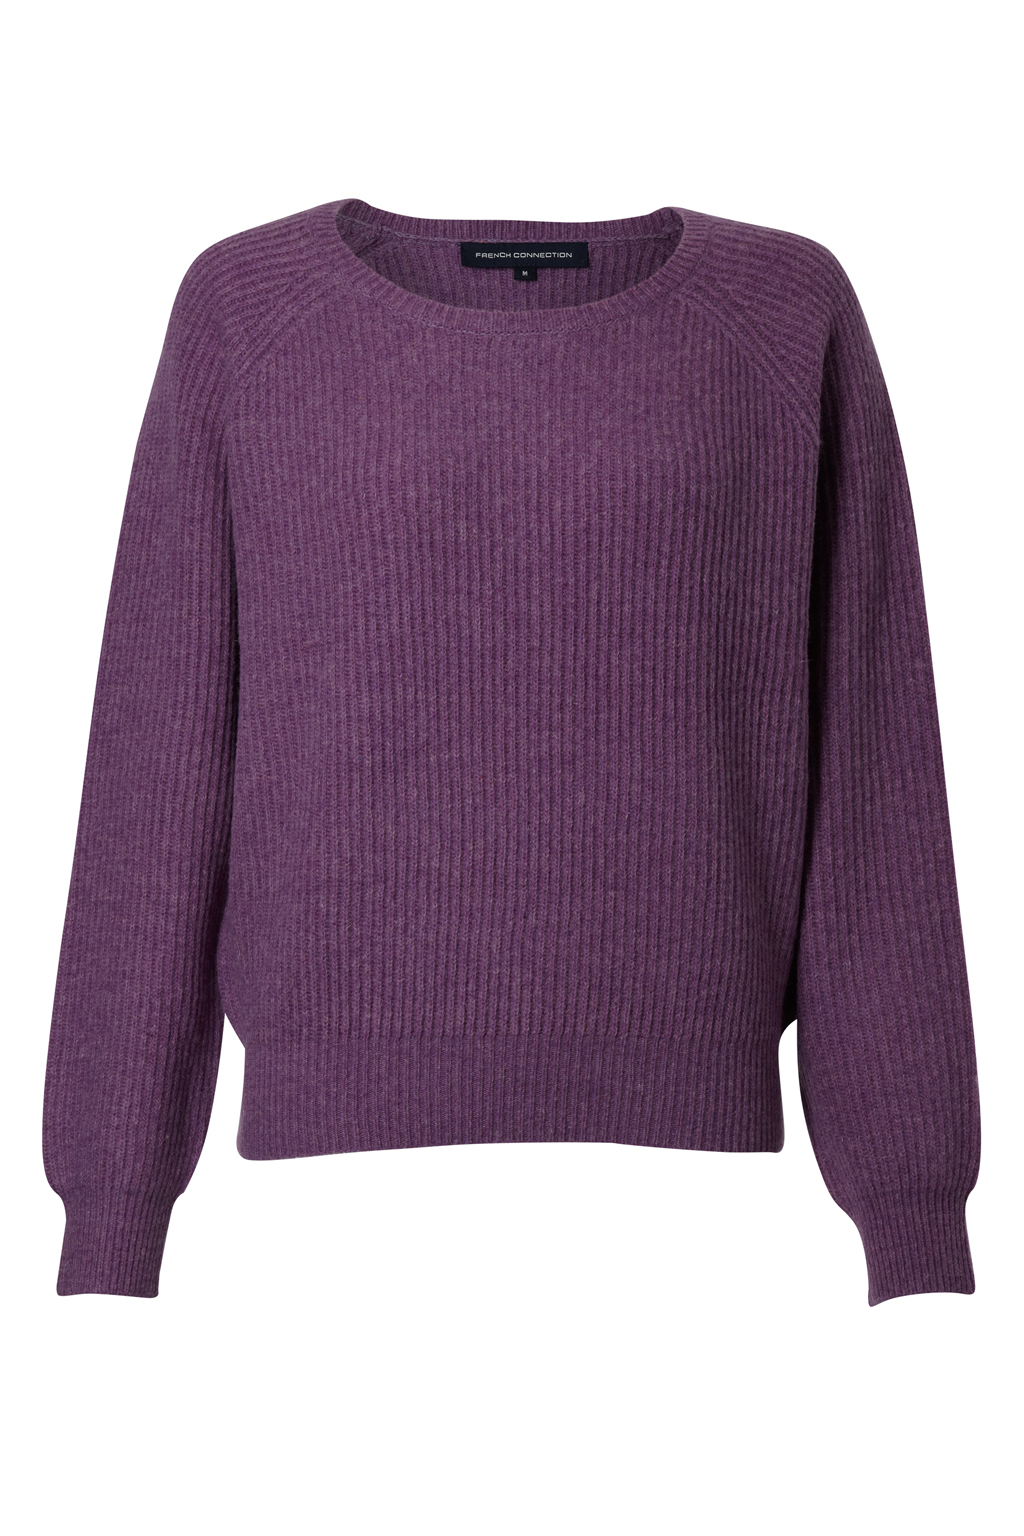 French Connection Natalie Knits Jumper in Purple (mid) | Lyst